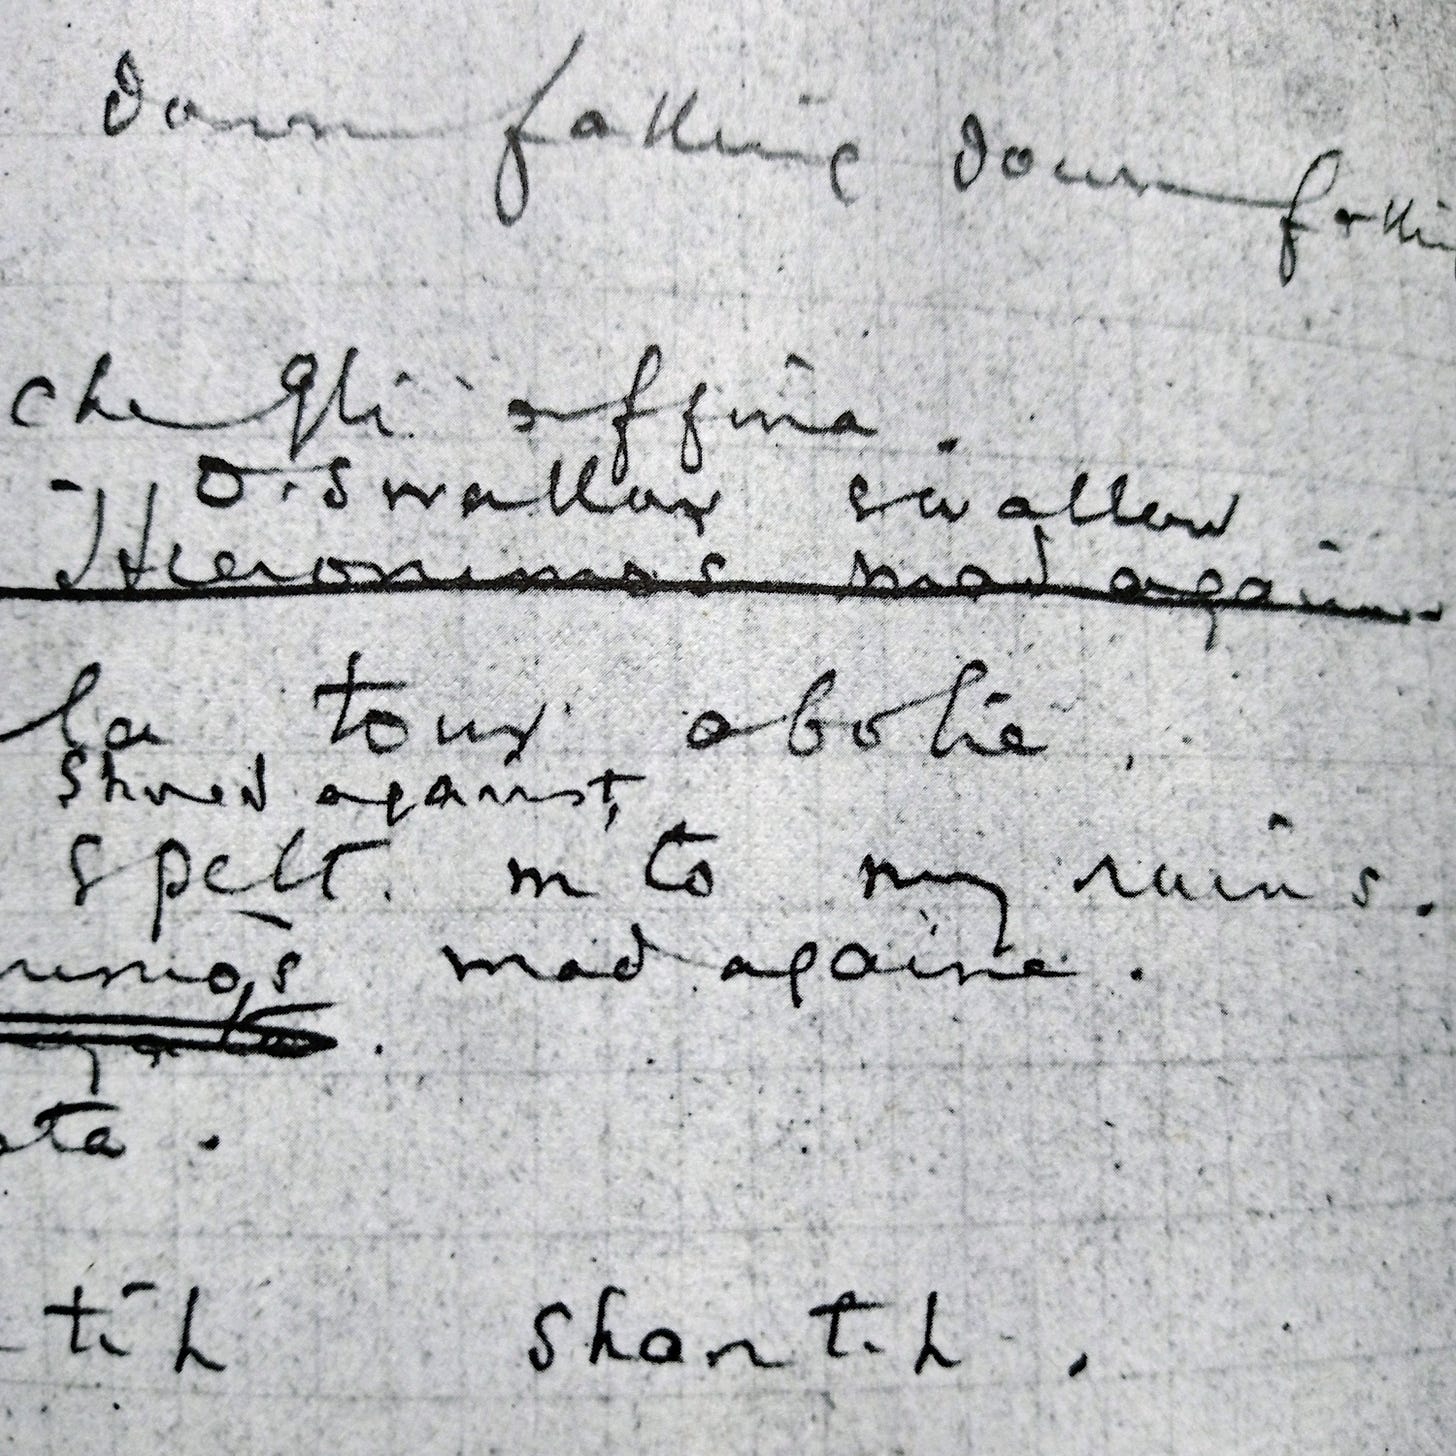 Manuscript of The Waste Land showing 'shored against' written above 'spelt into my ruins'